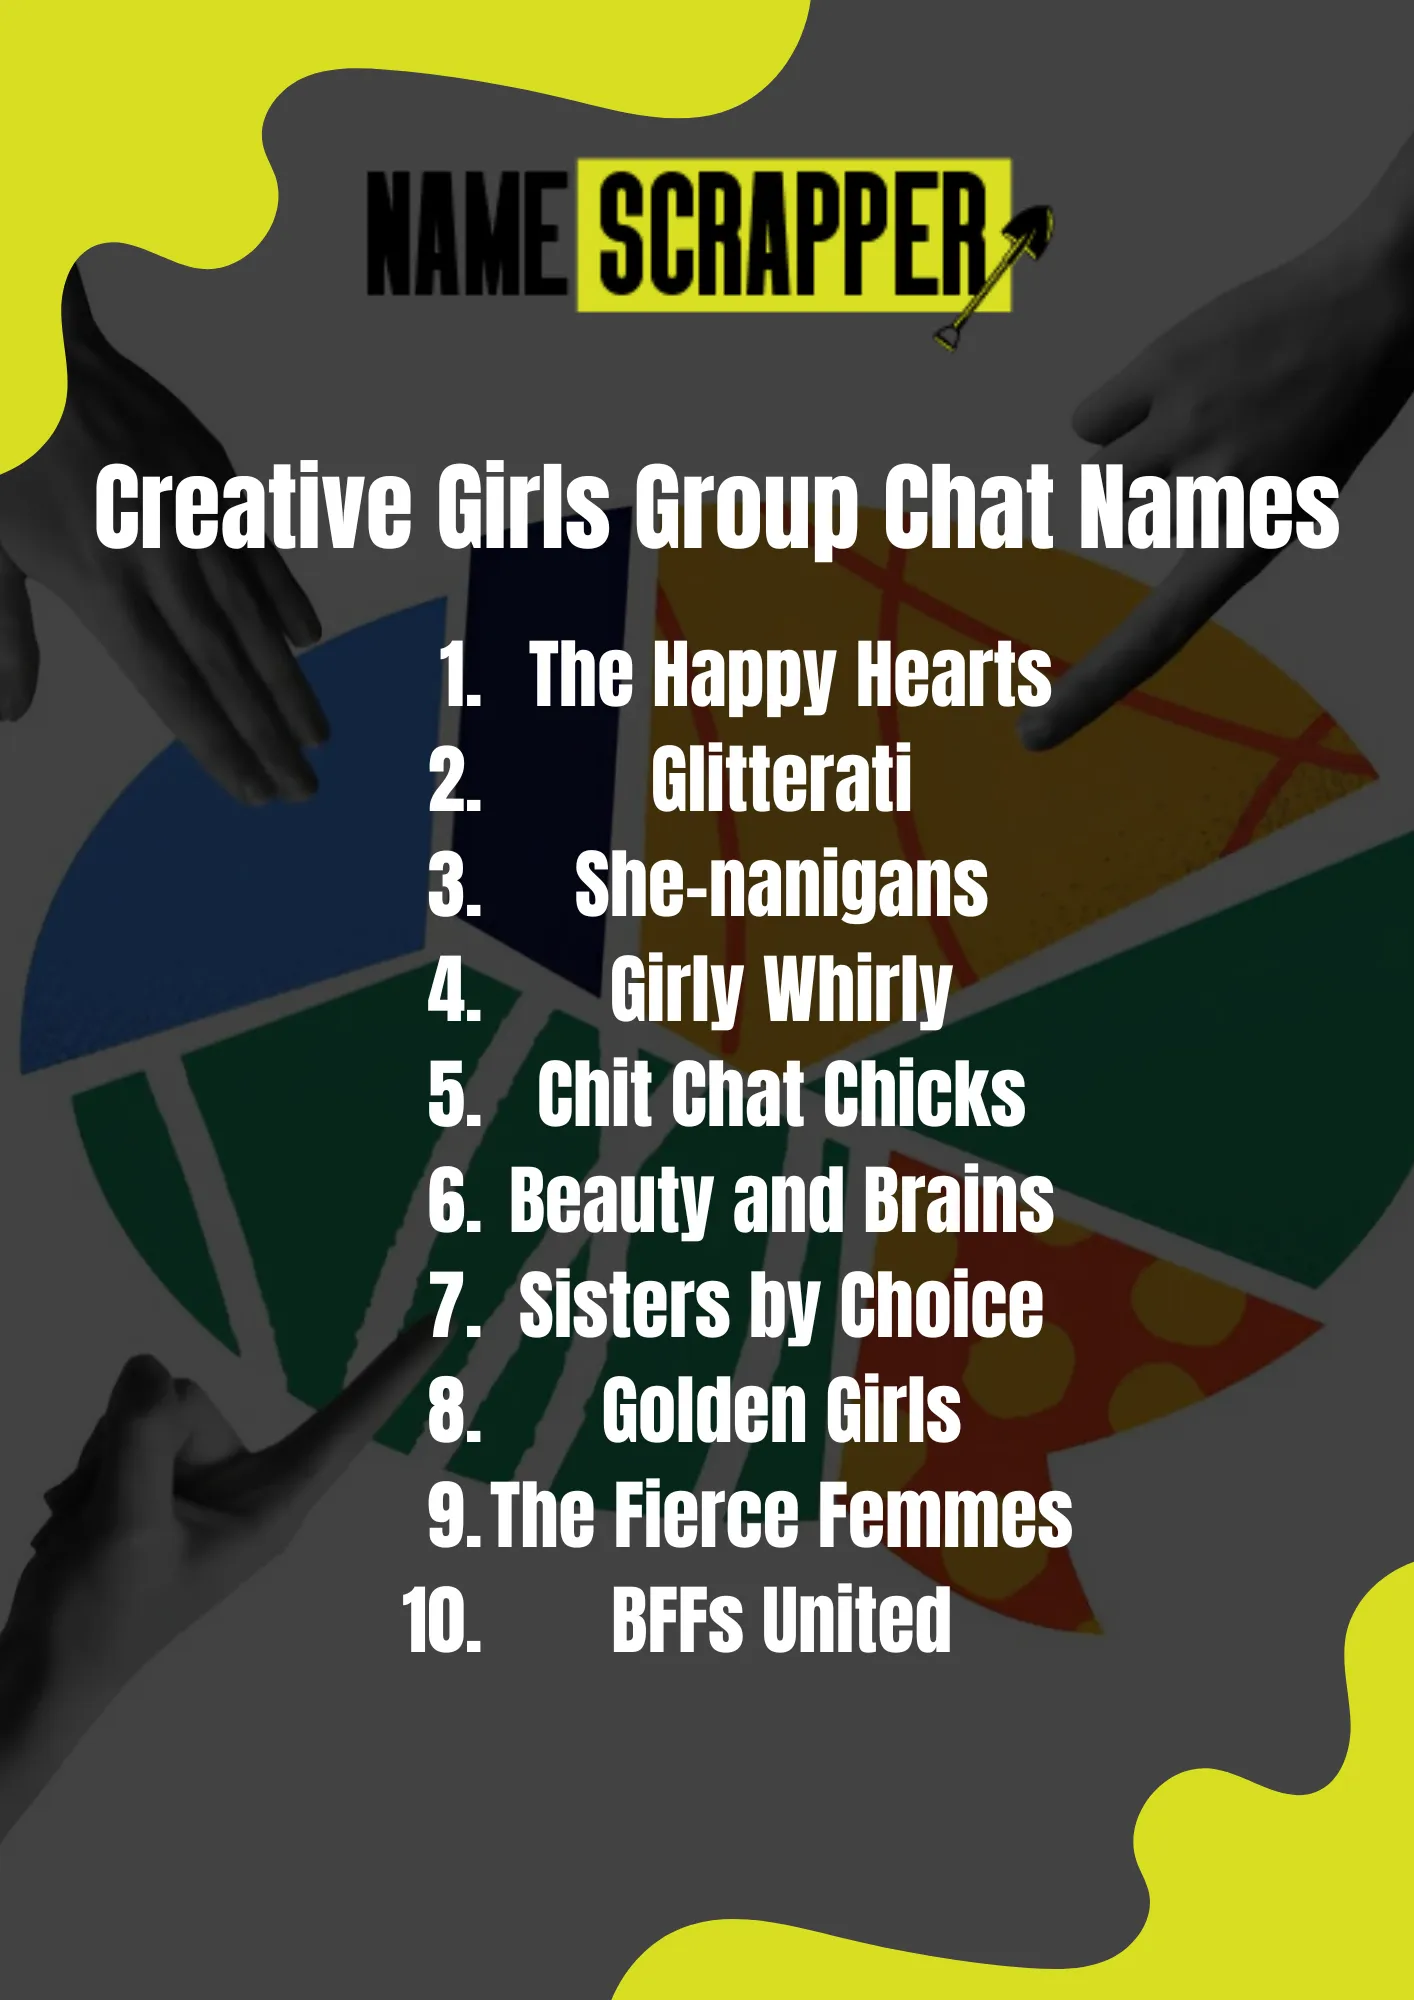 Creative Girls Group Chat Names